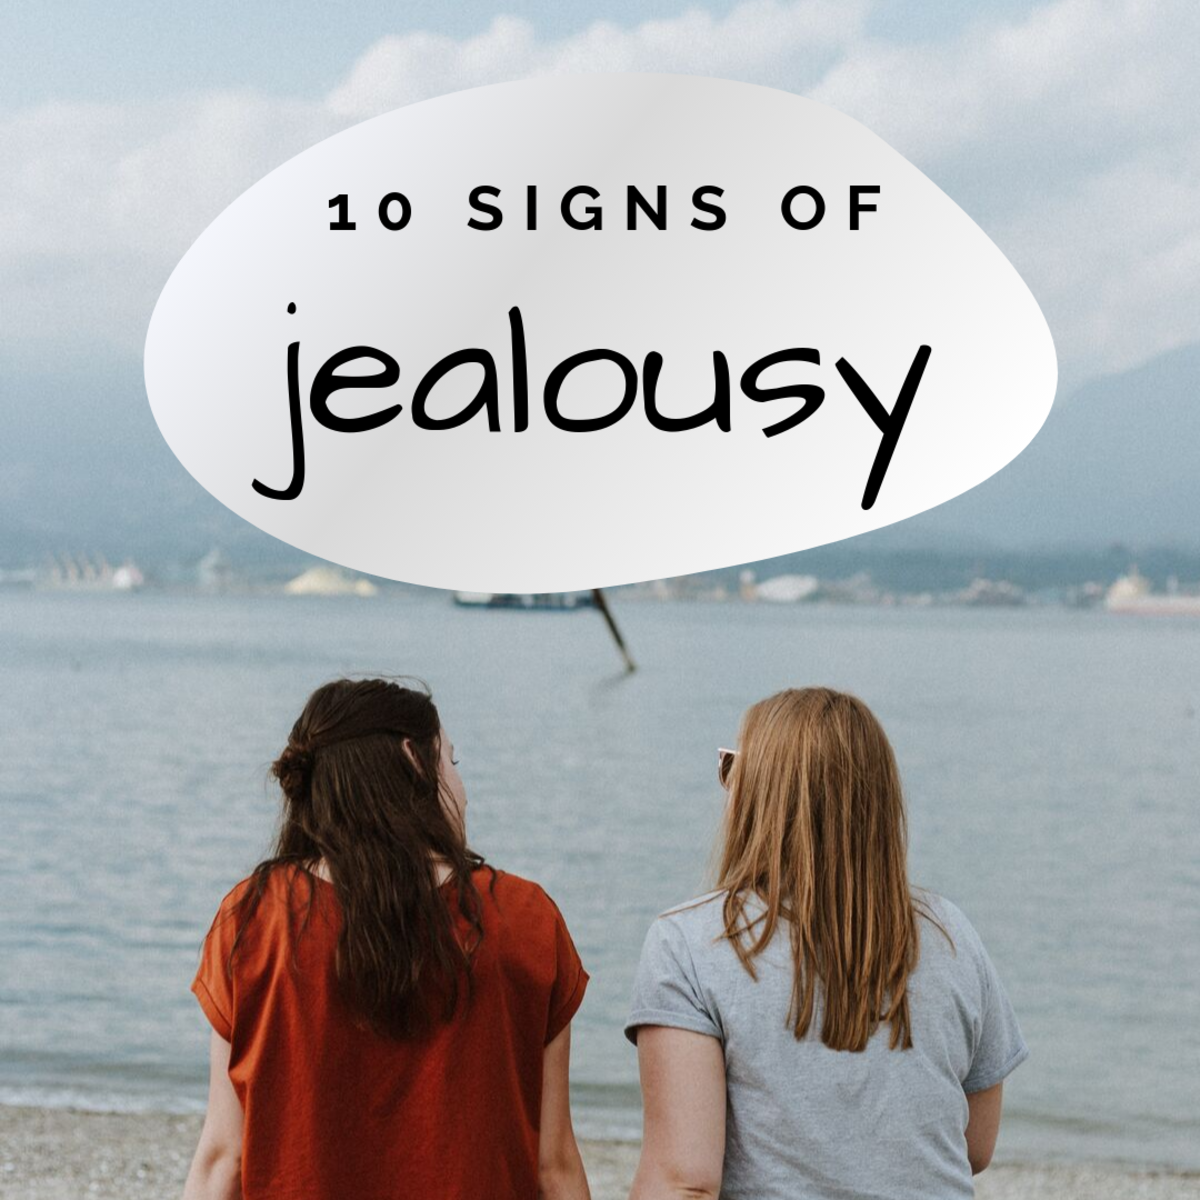 Jealousy isn't always easy to spot—especially in close friends and family. Here are a few subtle signs of the green-eyed monster. 